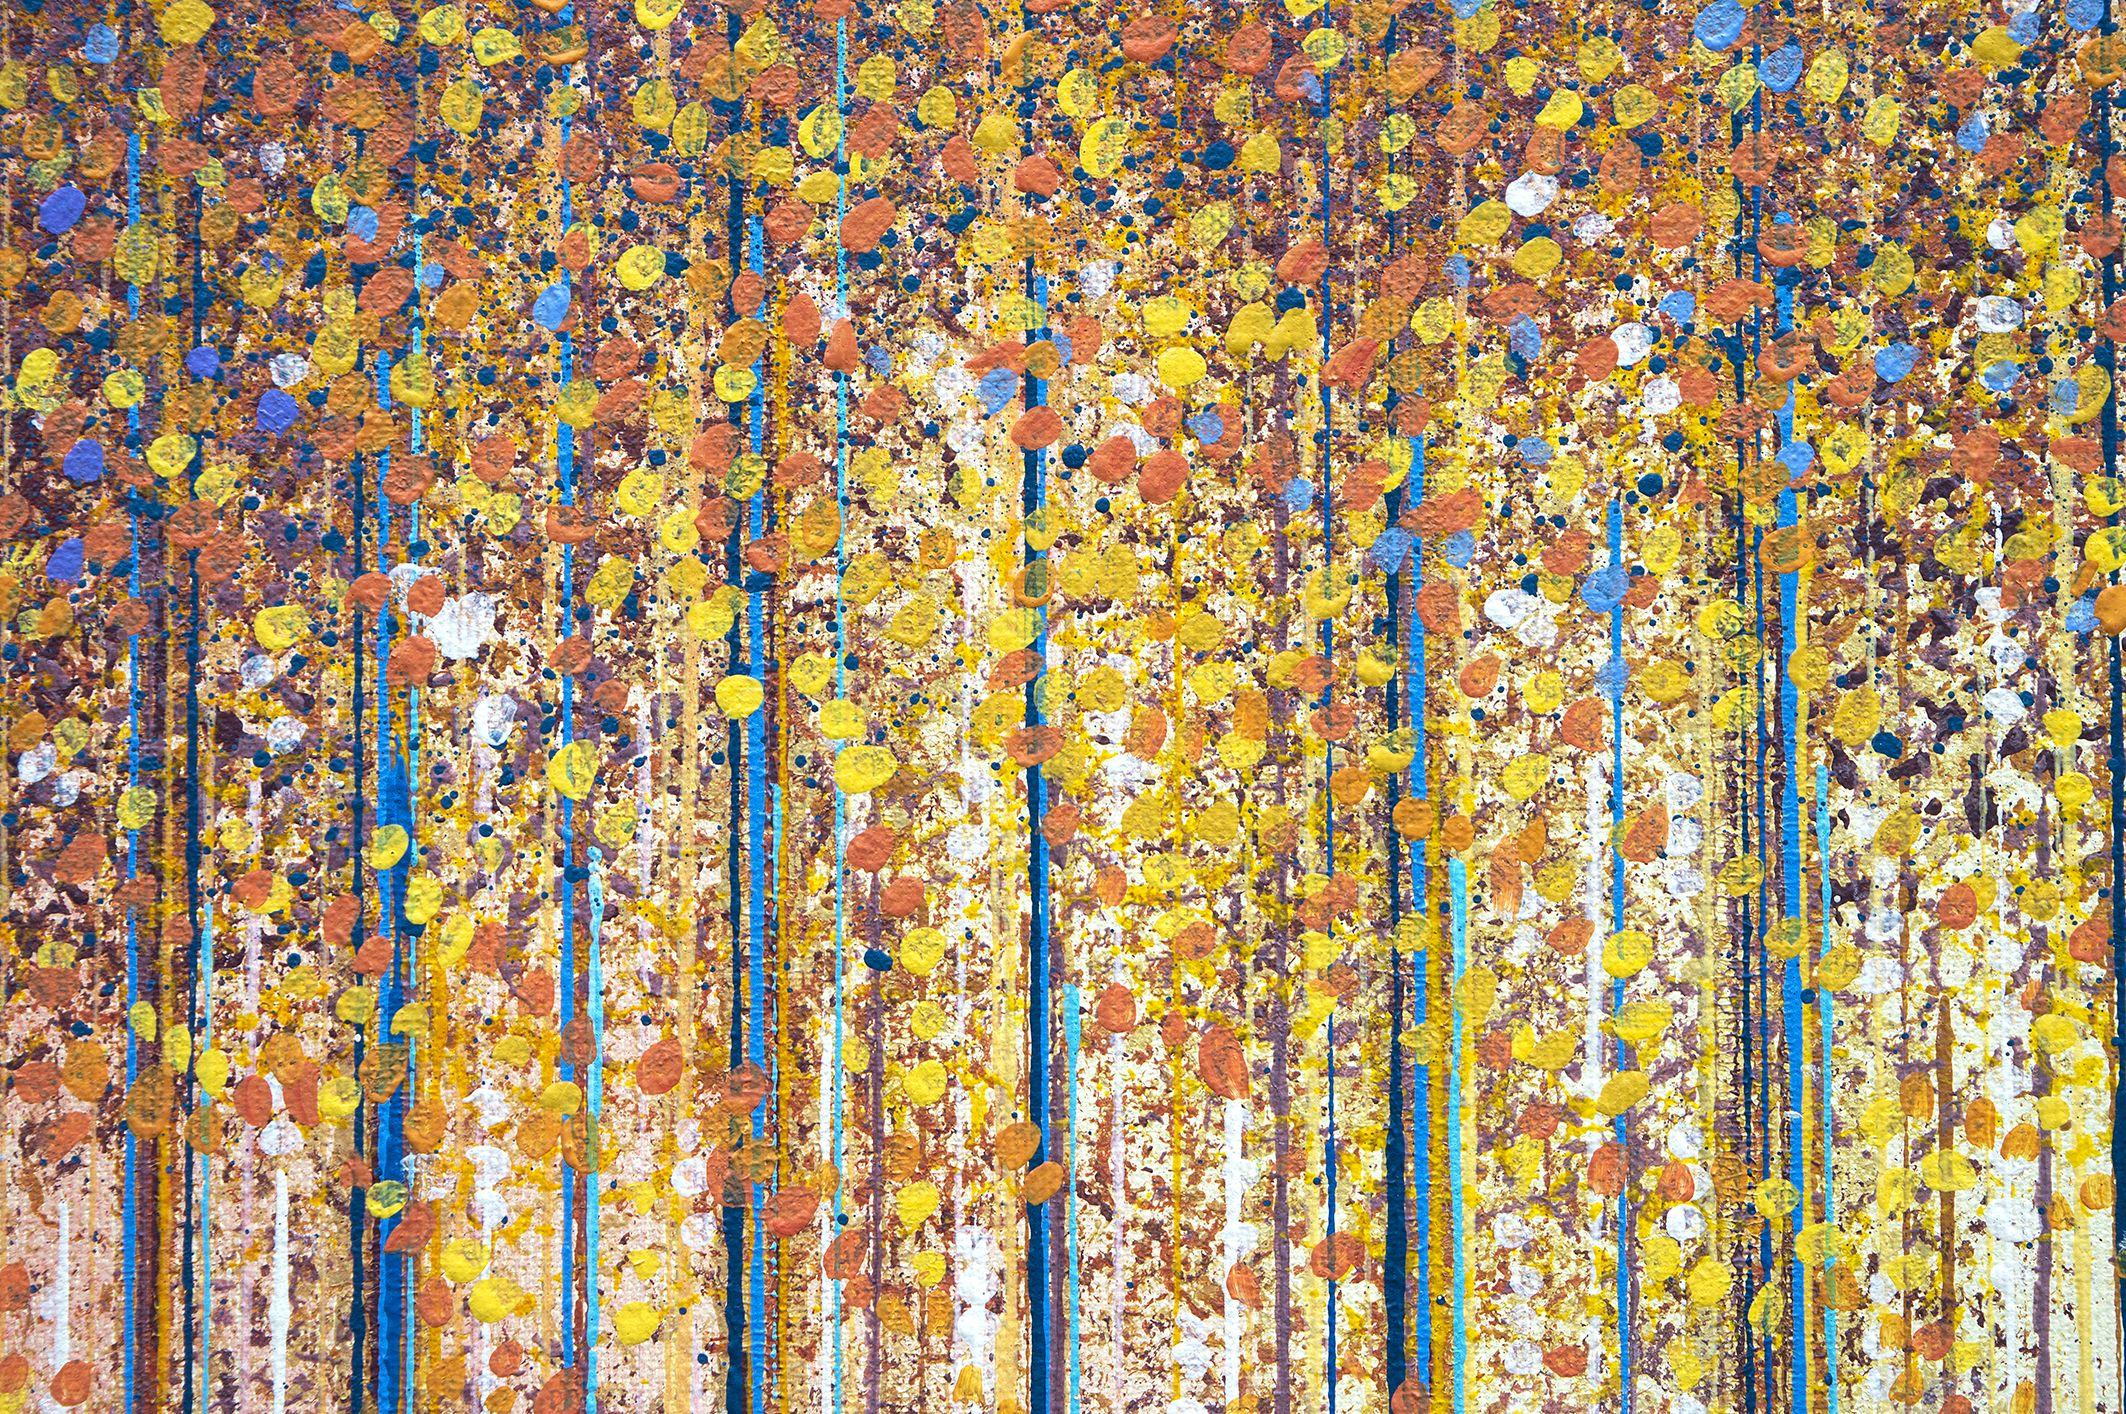 Mist Rising In Autumn Forest, Painting, Acrylic on Canvas 3